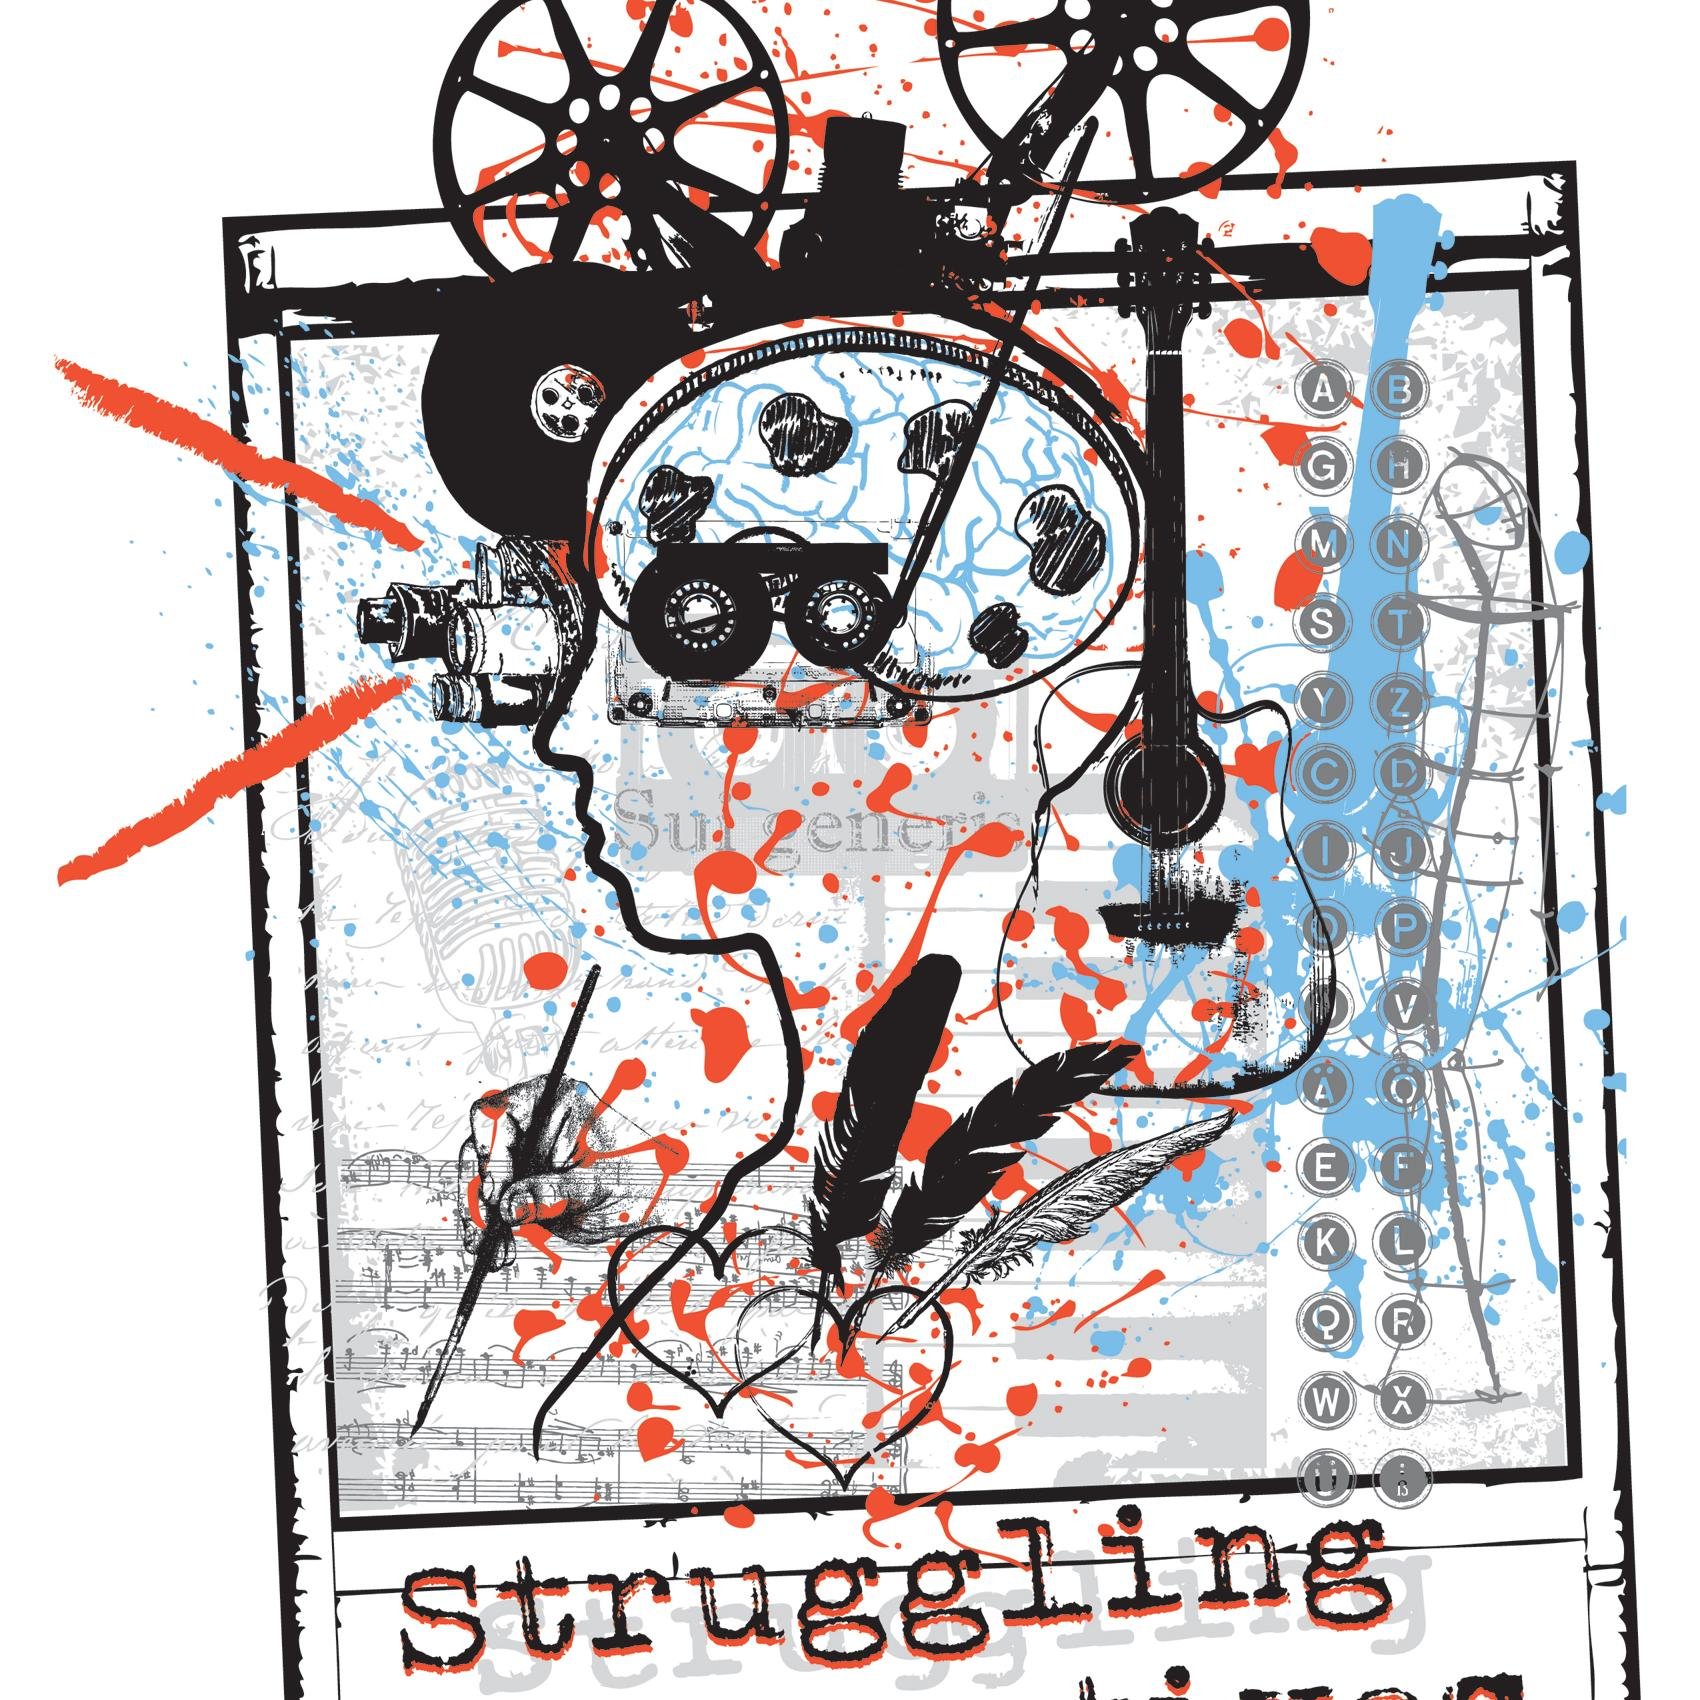 Struggling creatives collaborative is dedicated in supporting, showcasing and networking the creative underdog.